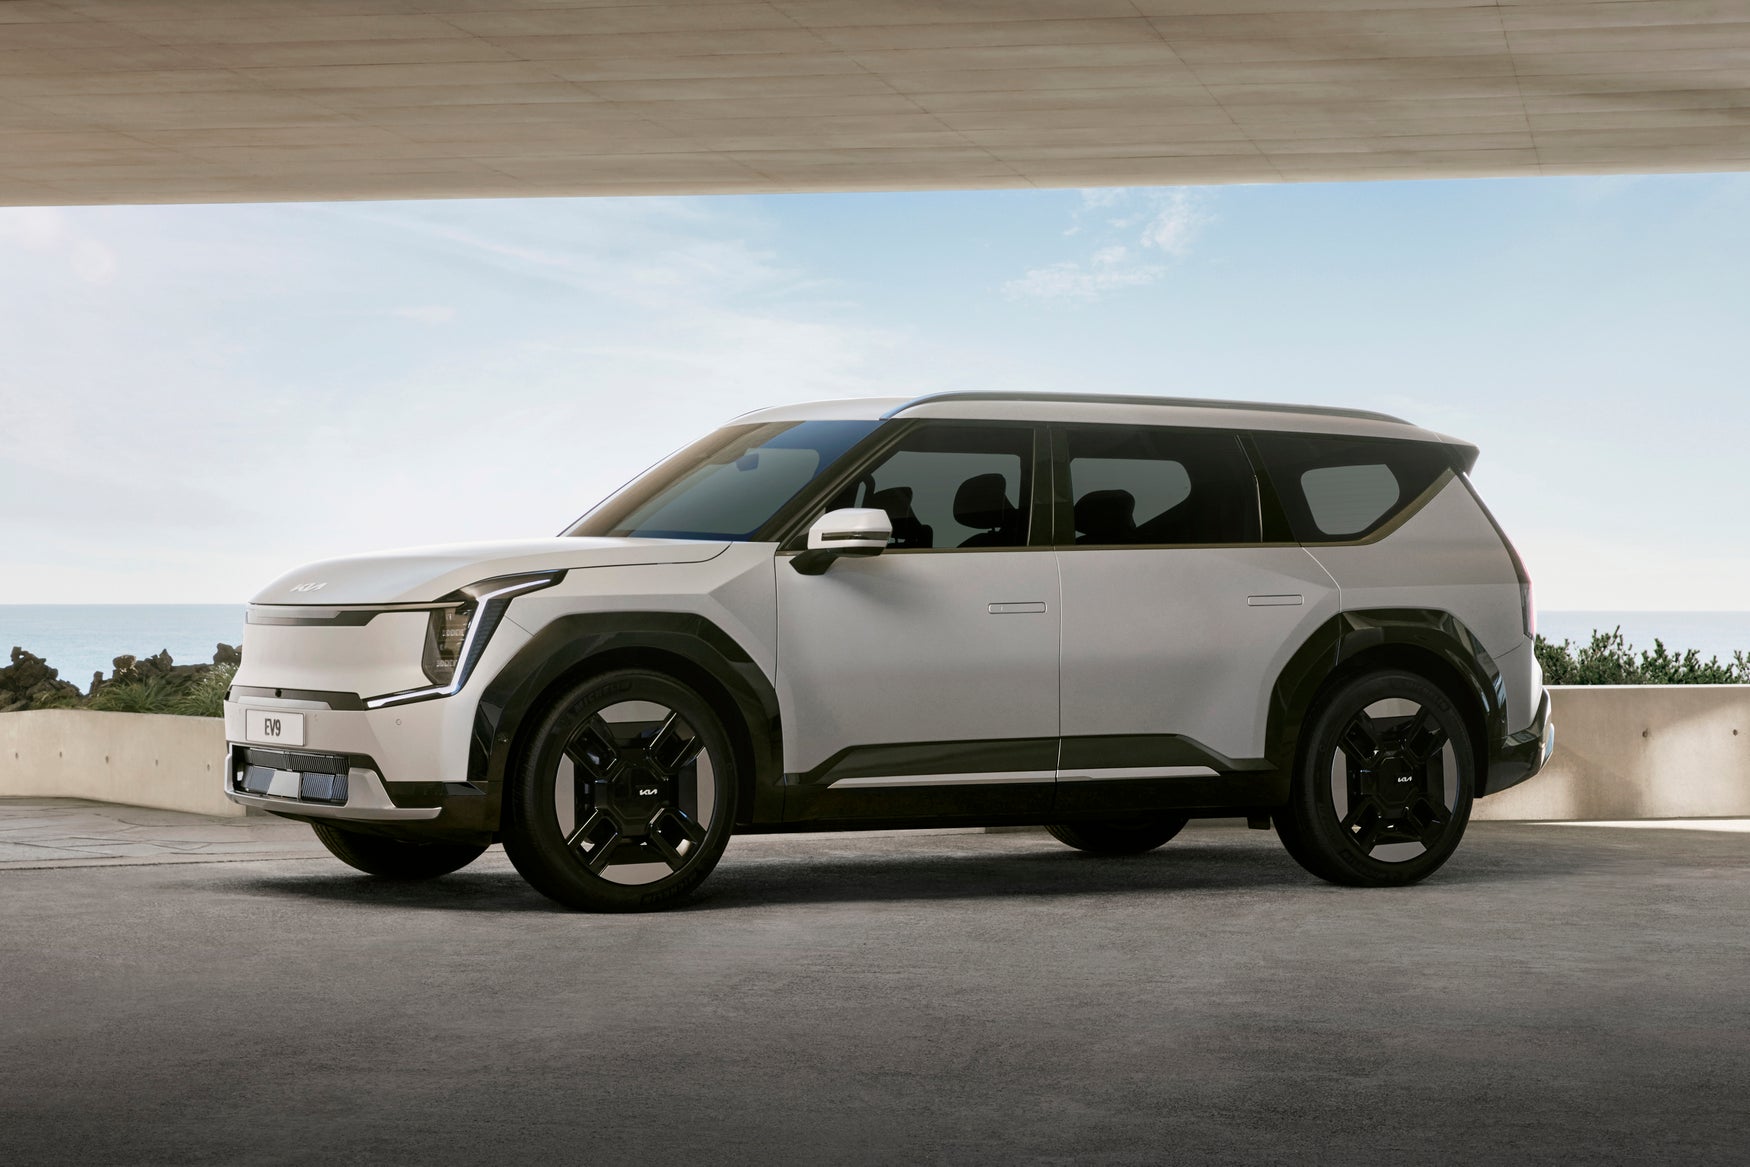 2023 kia ev9 electric suv: prices, specs and release date